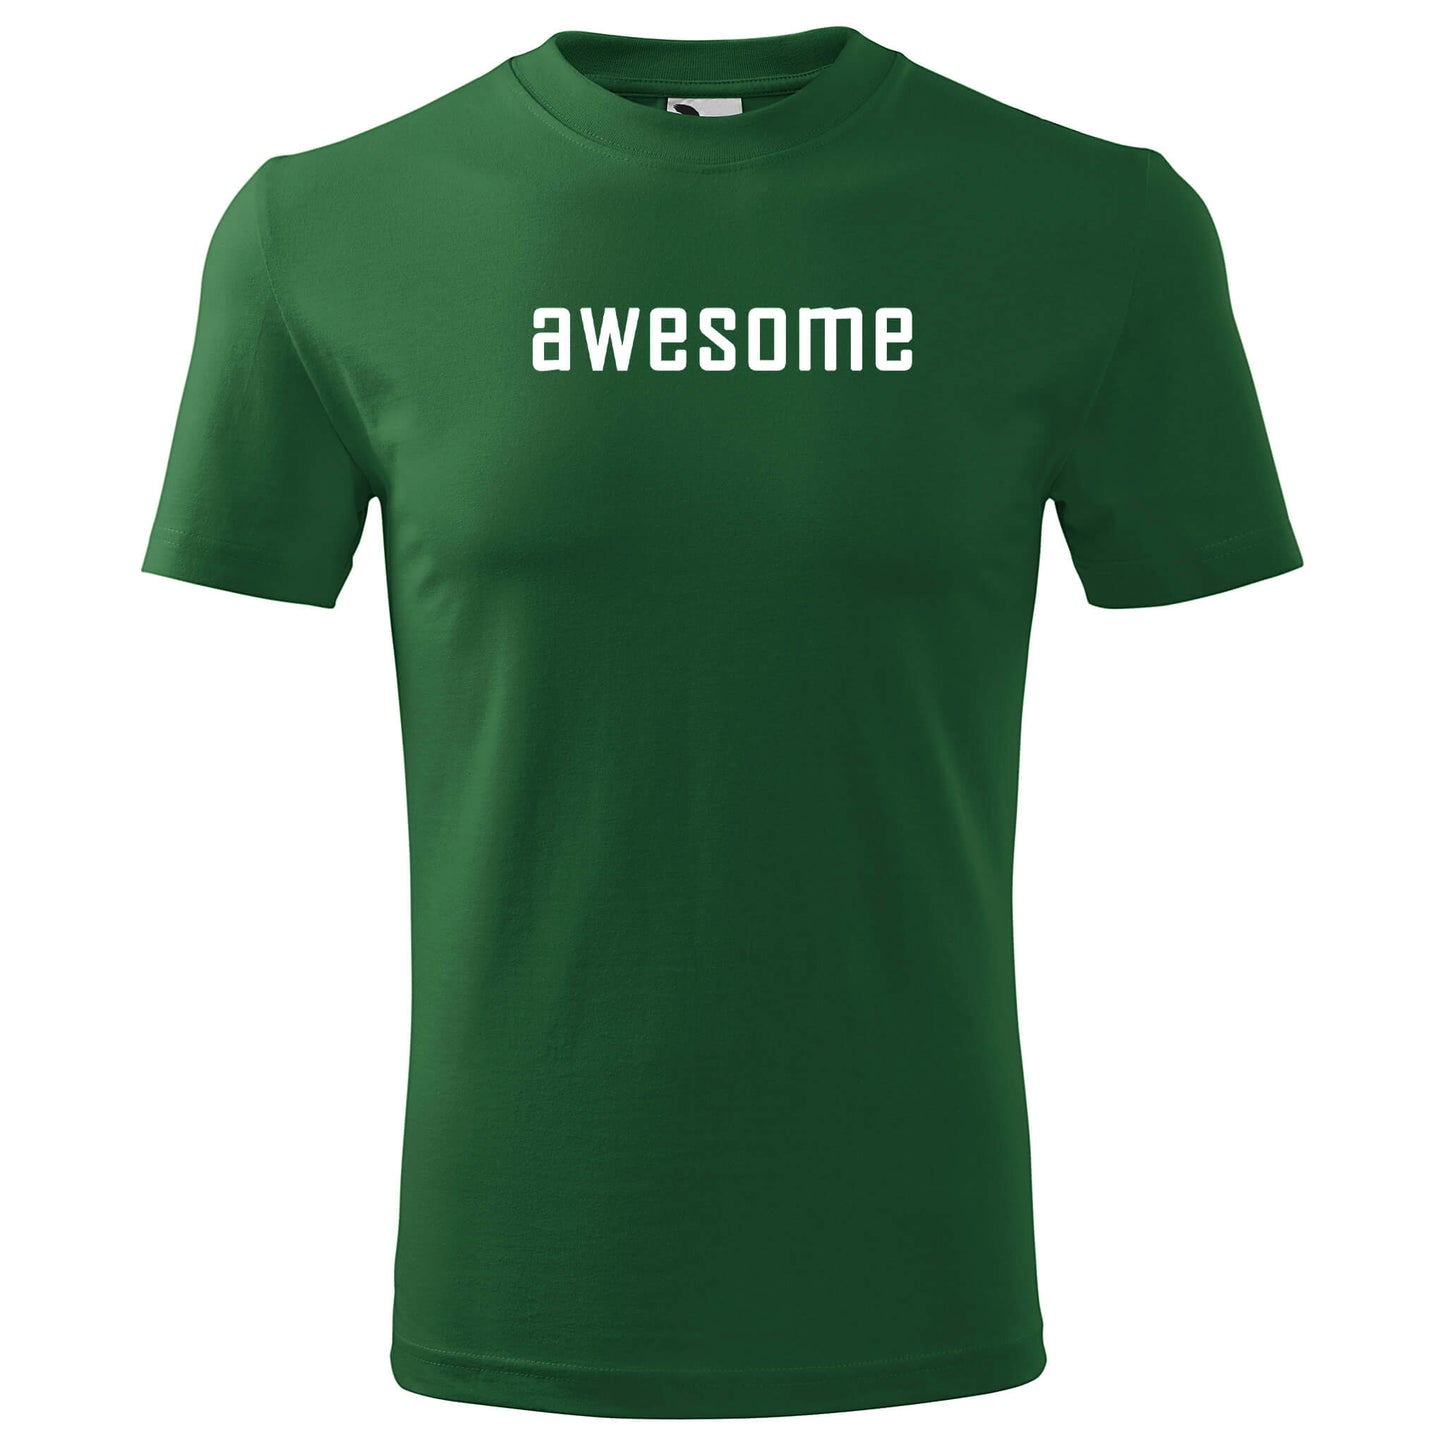 T-shirt - awesome - rvdesignprint